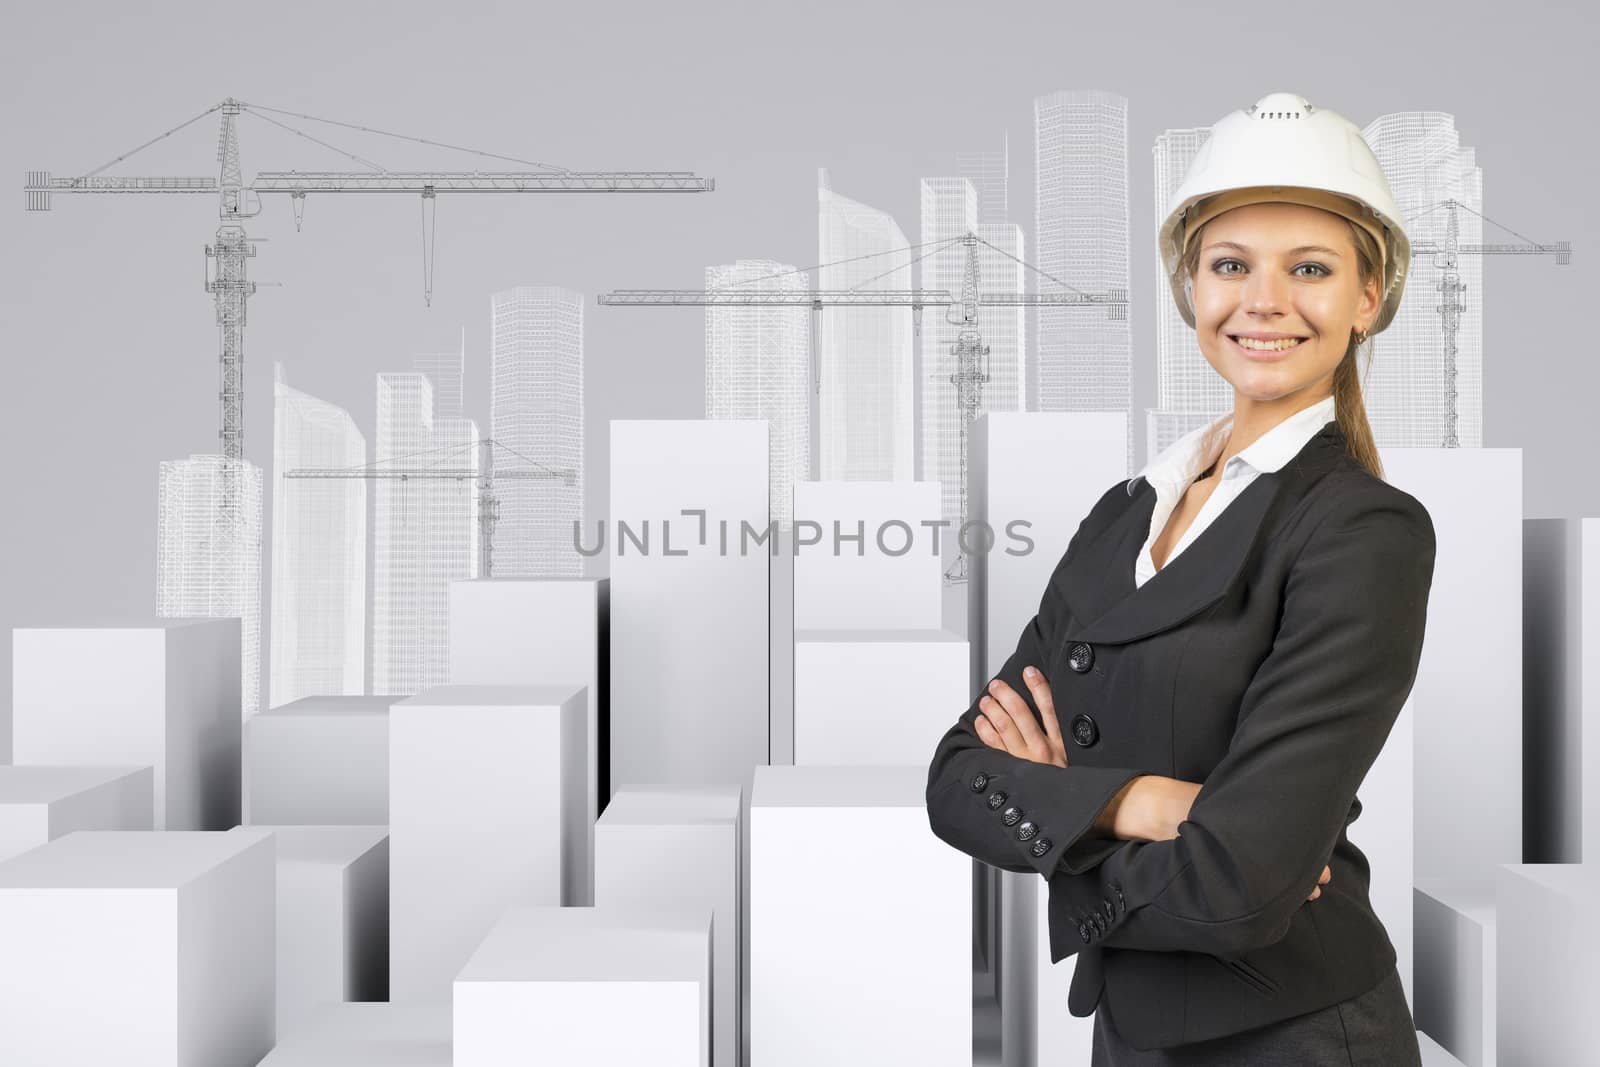 Business woman in suit and helment with crossed arms, looking at camera, smiling. Many white cubes with wire-frame buildings and tower cranes on gray background